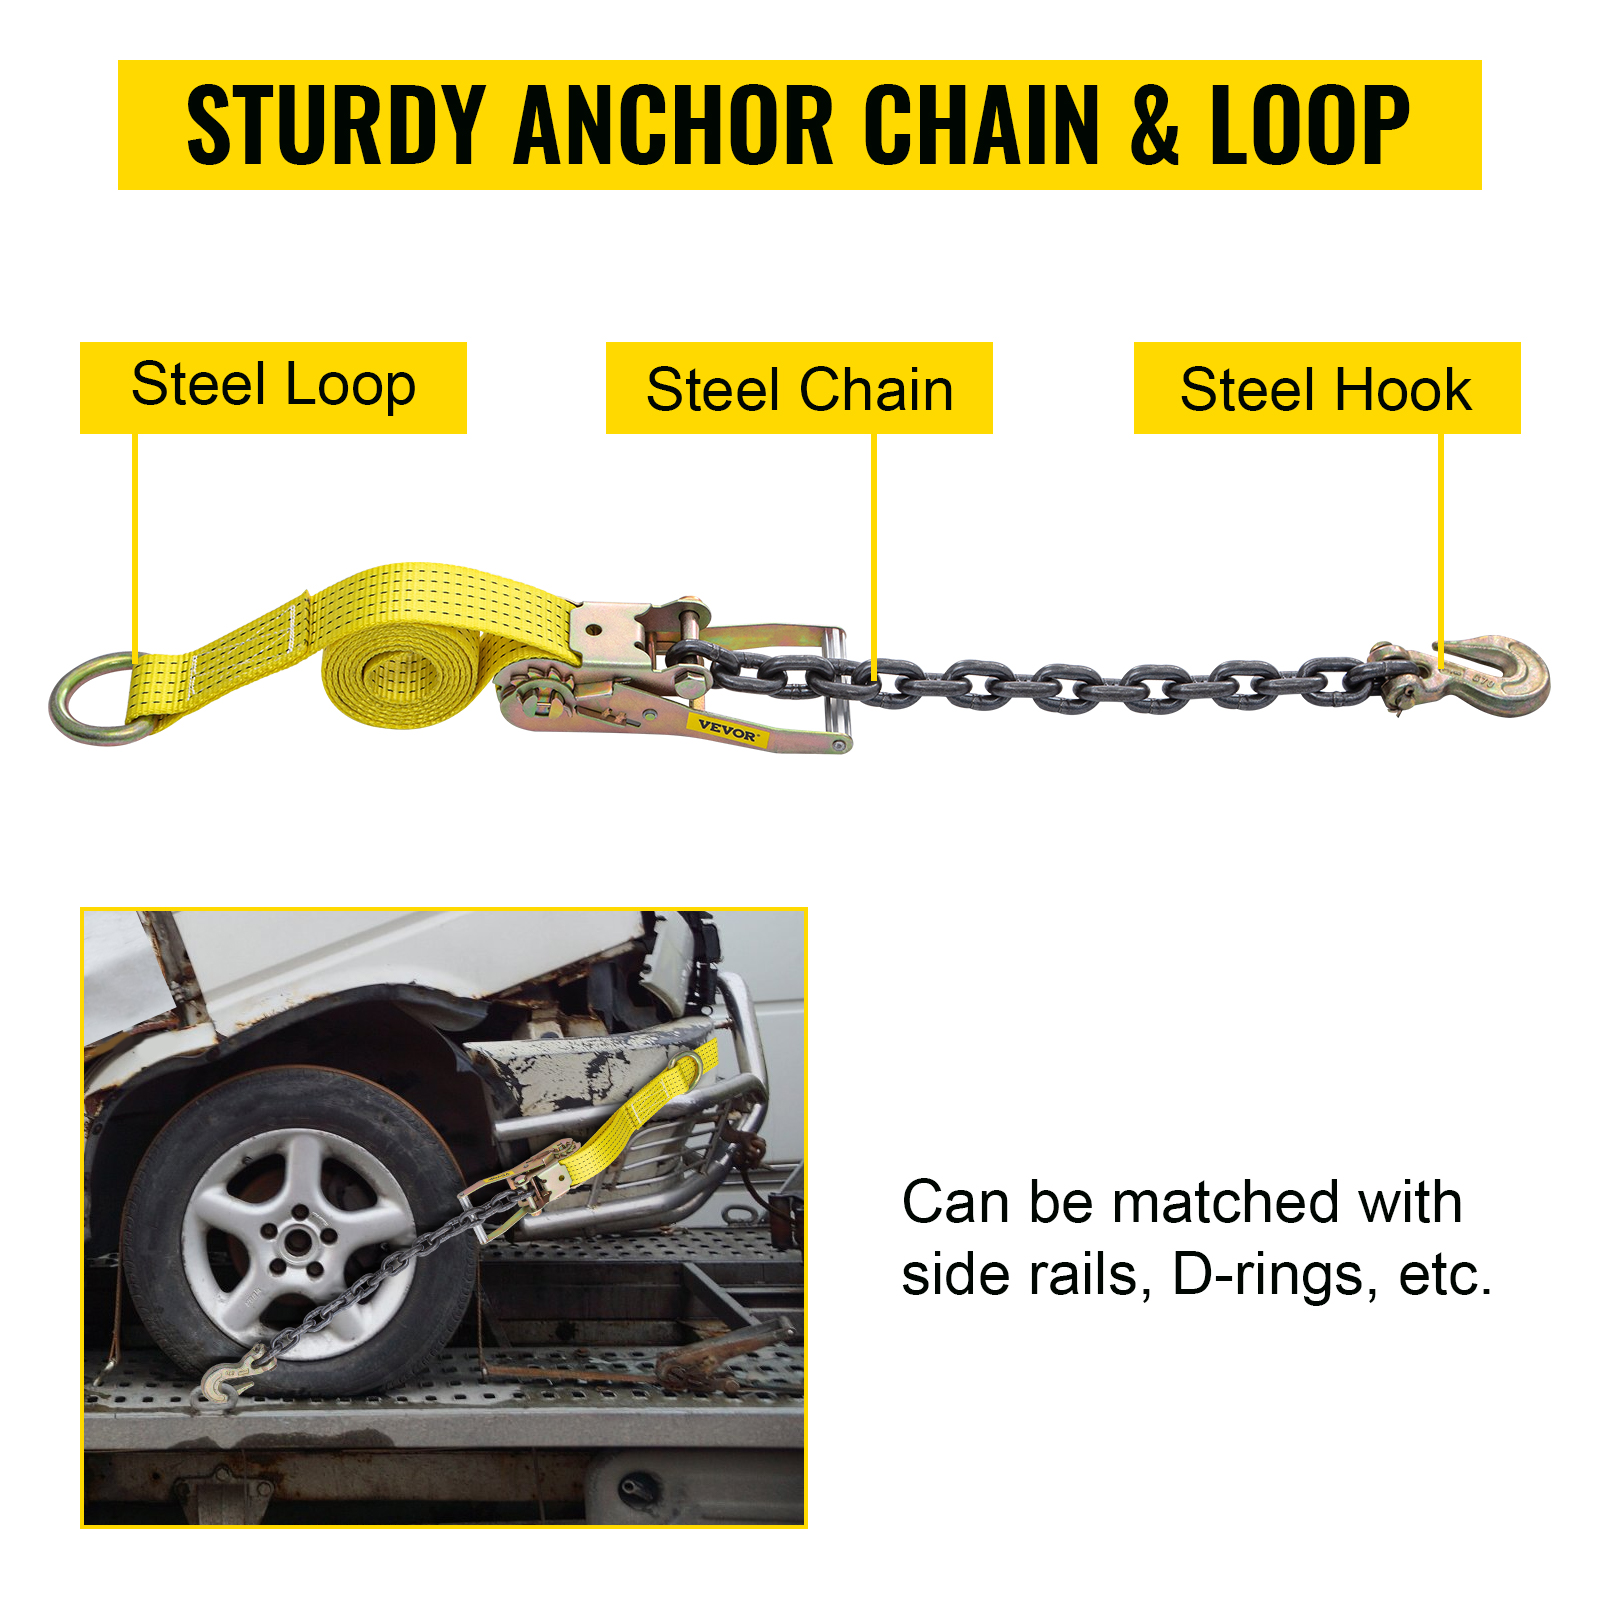 VEVOR Ratchet Tie Down Straps, 2'' x 9.8' Heavy Duty Ratchet Straps with  11.8 Chain Anchors, 4000 lbs Working Load, 4 Pack Tie Down Set for Moving  Motorcycle, Cargo & Daily Use